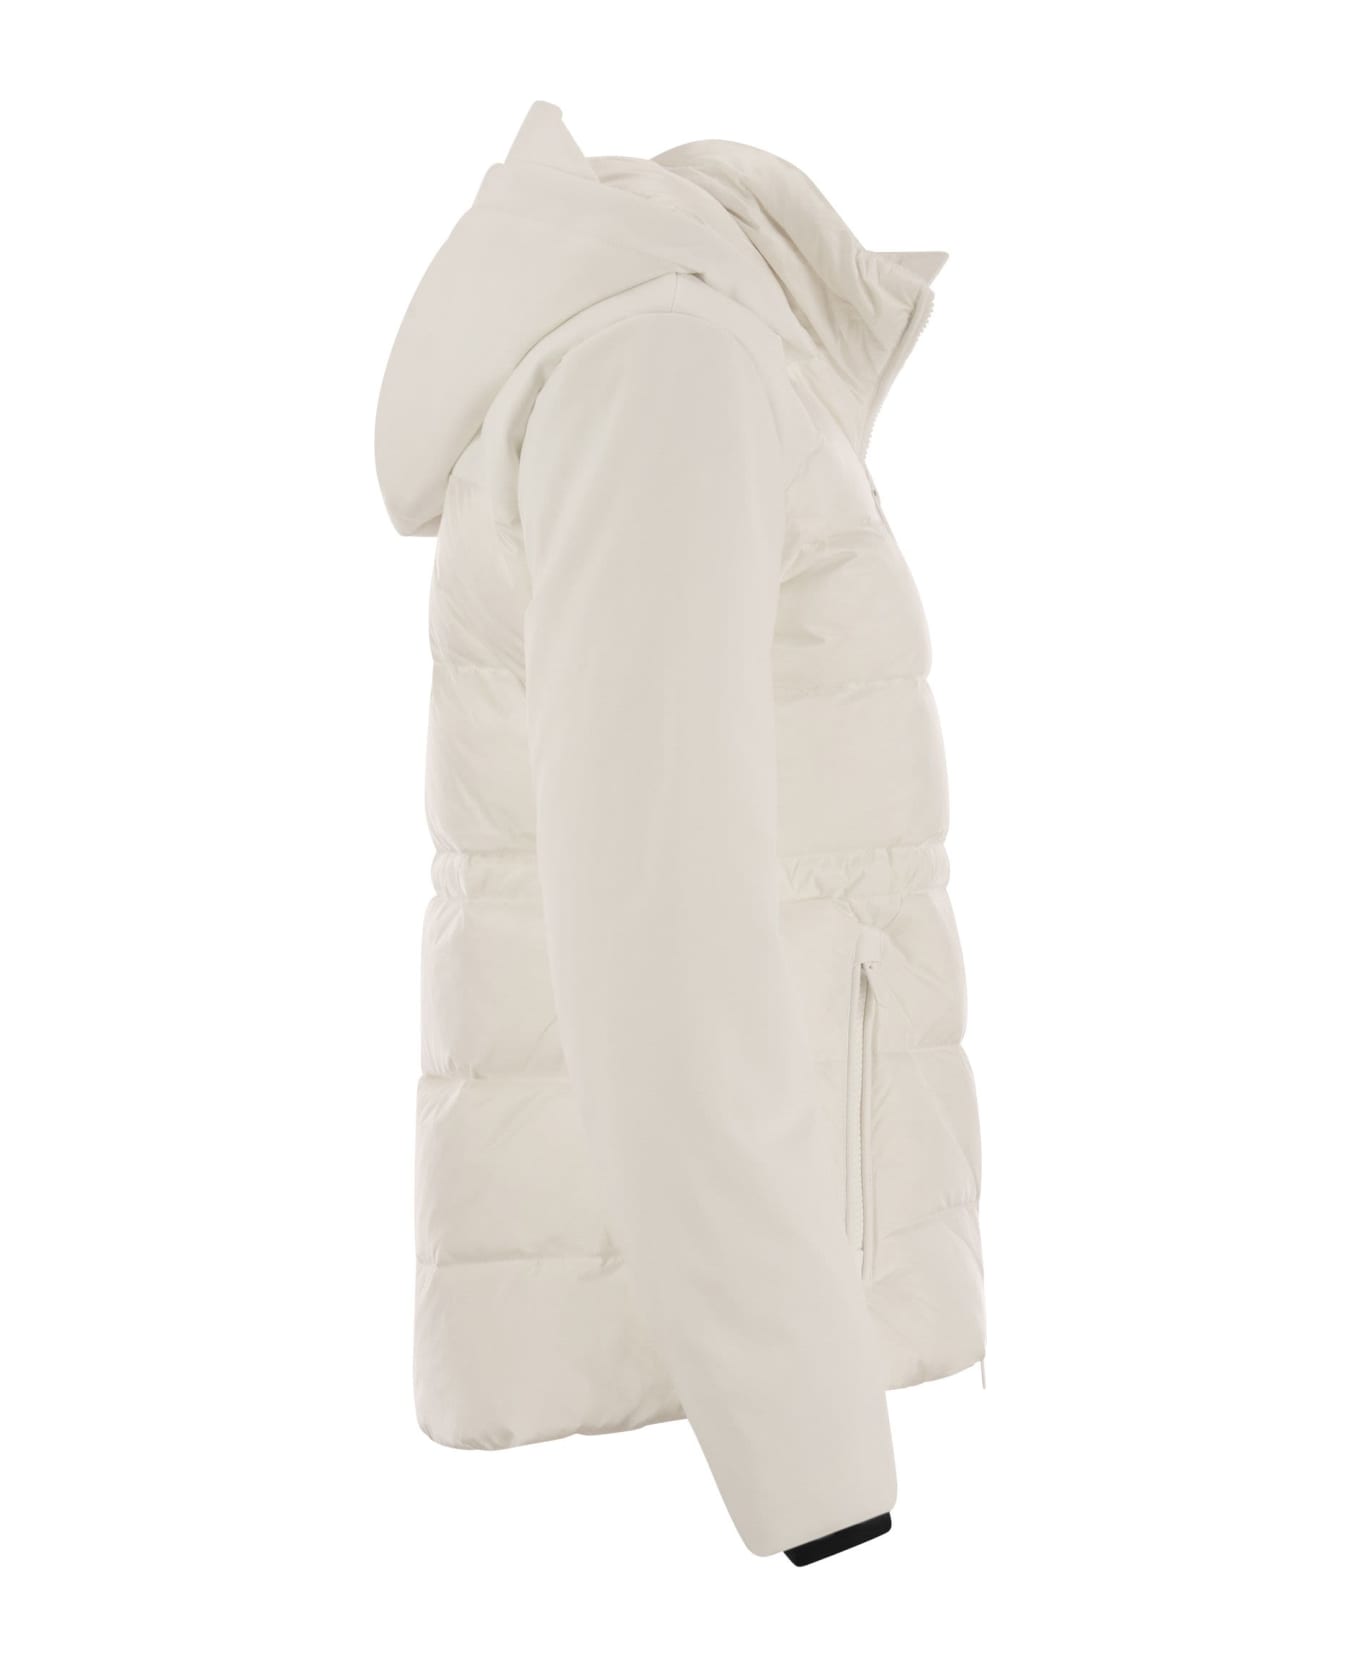 Woolrich Quilted Down Jacket With Hood - White